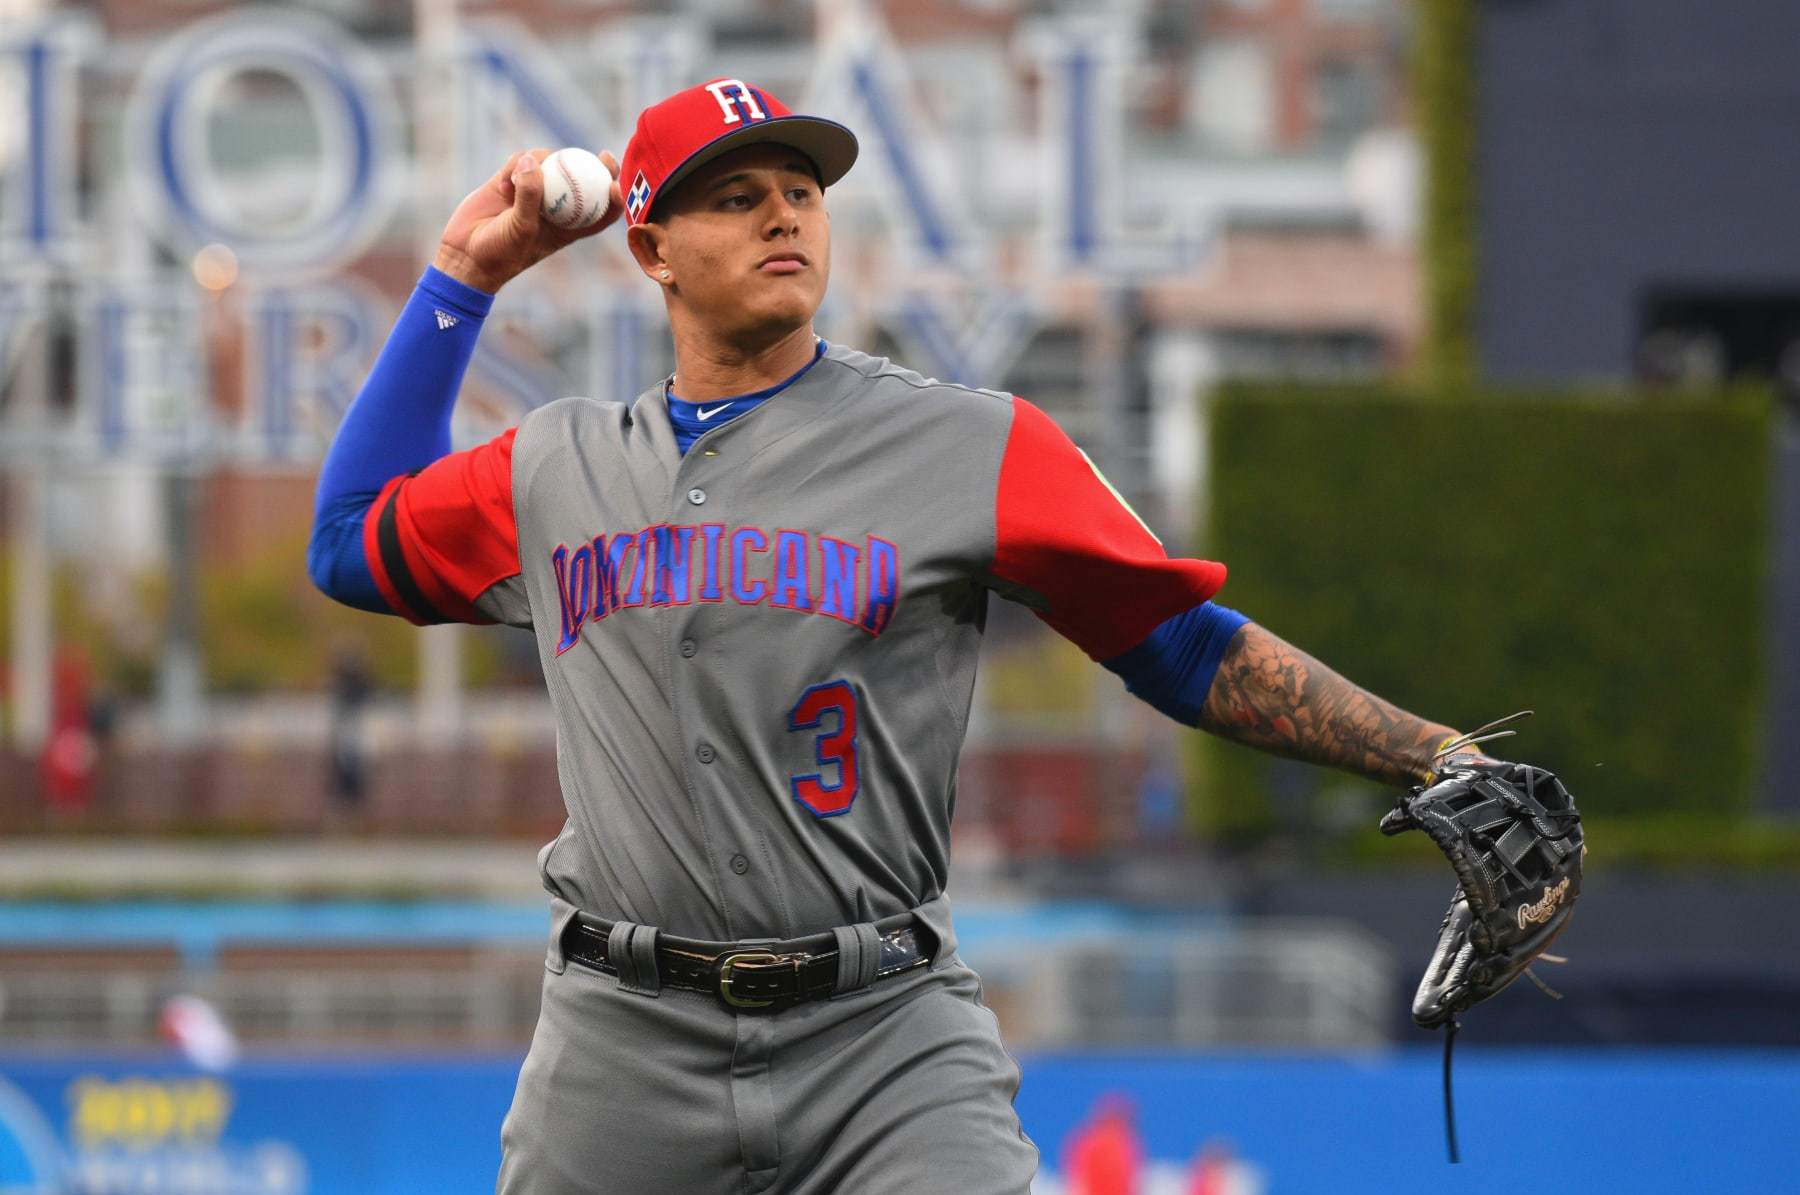 Yadier Molina, Puerto Rico's heart and soul in the World Baseball Classic